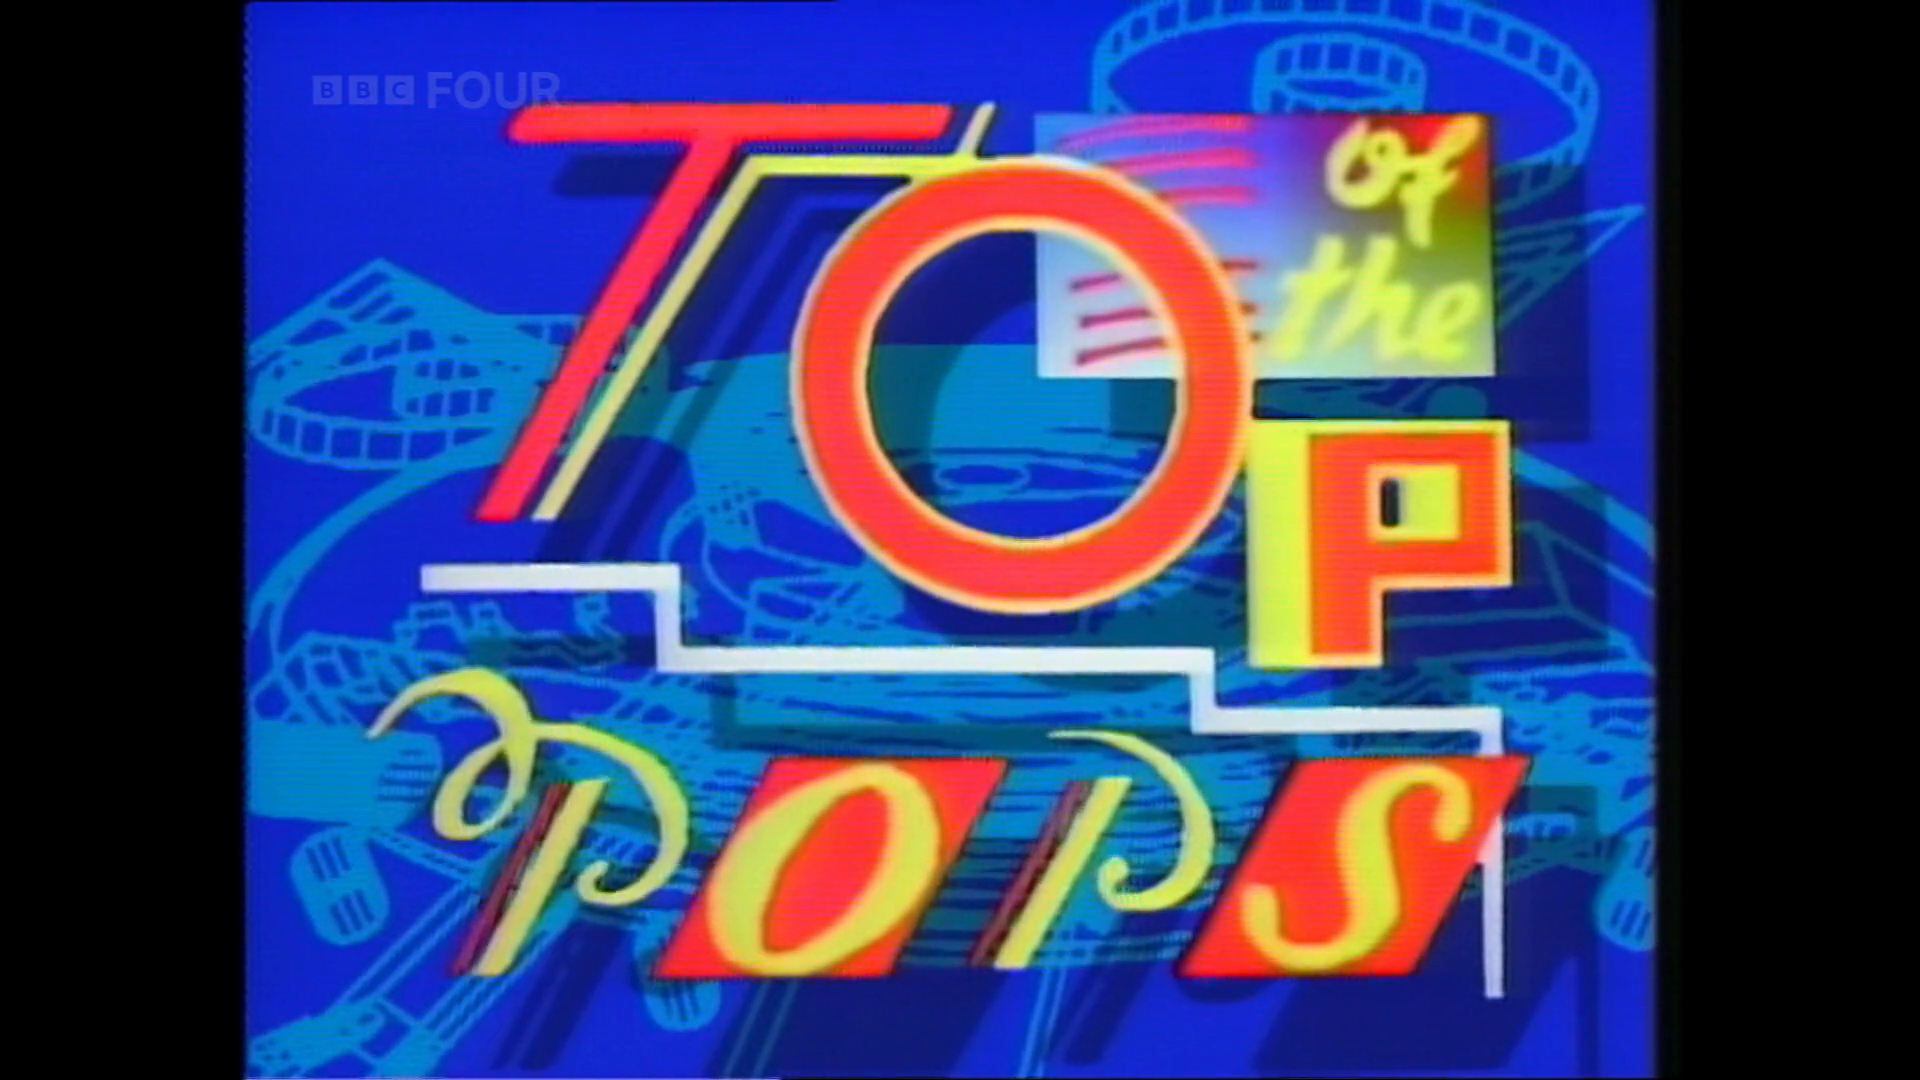 Top of the Tops logo from February 25th, 1988